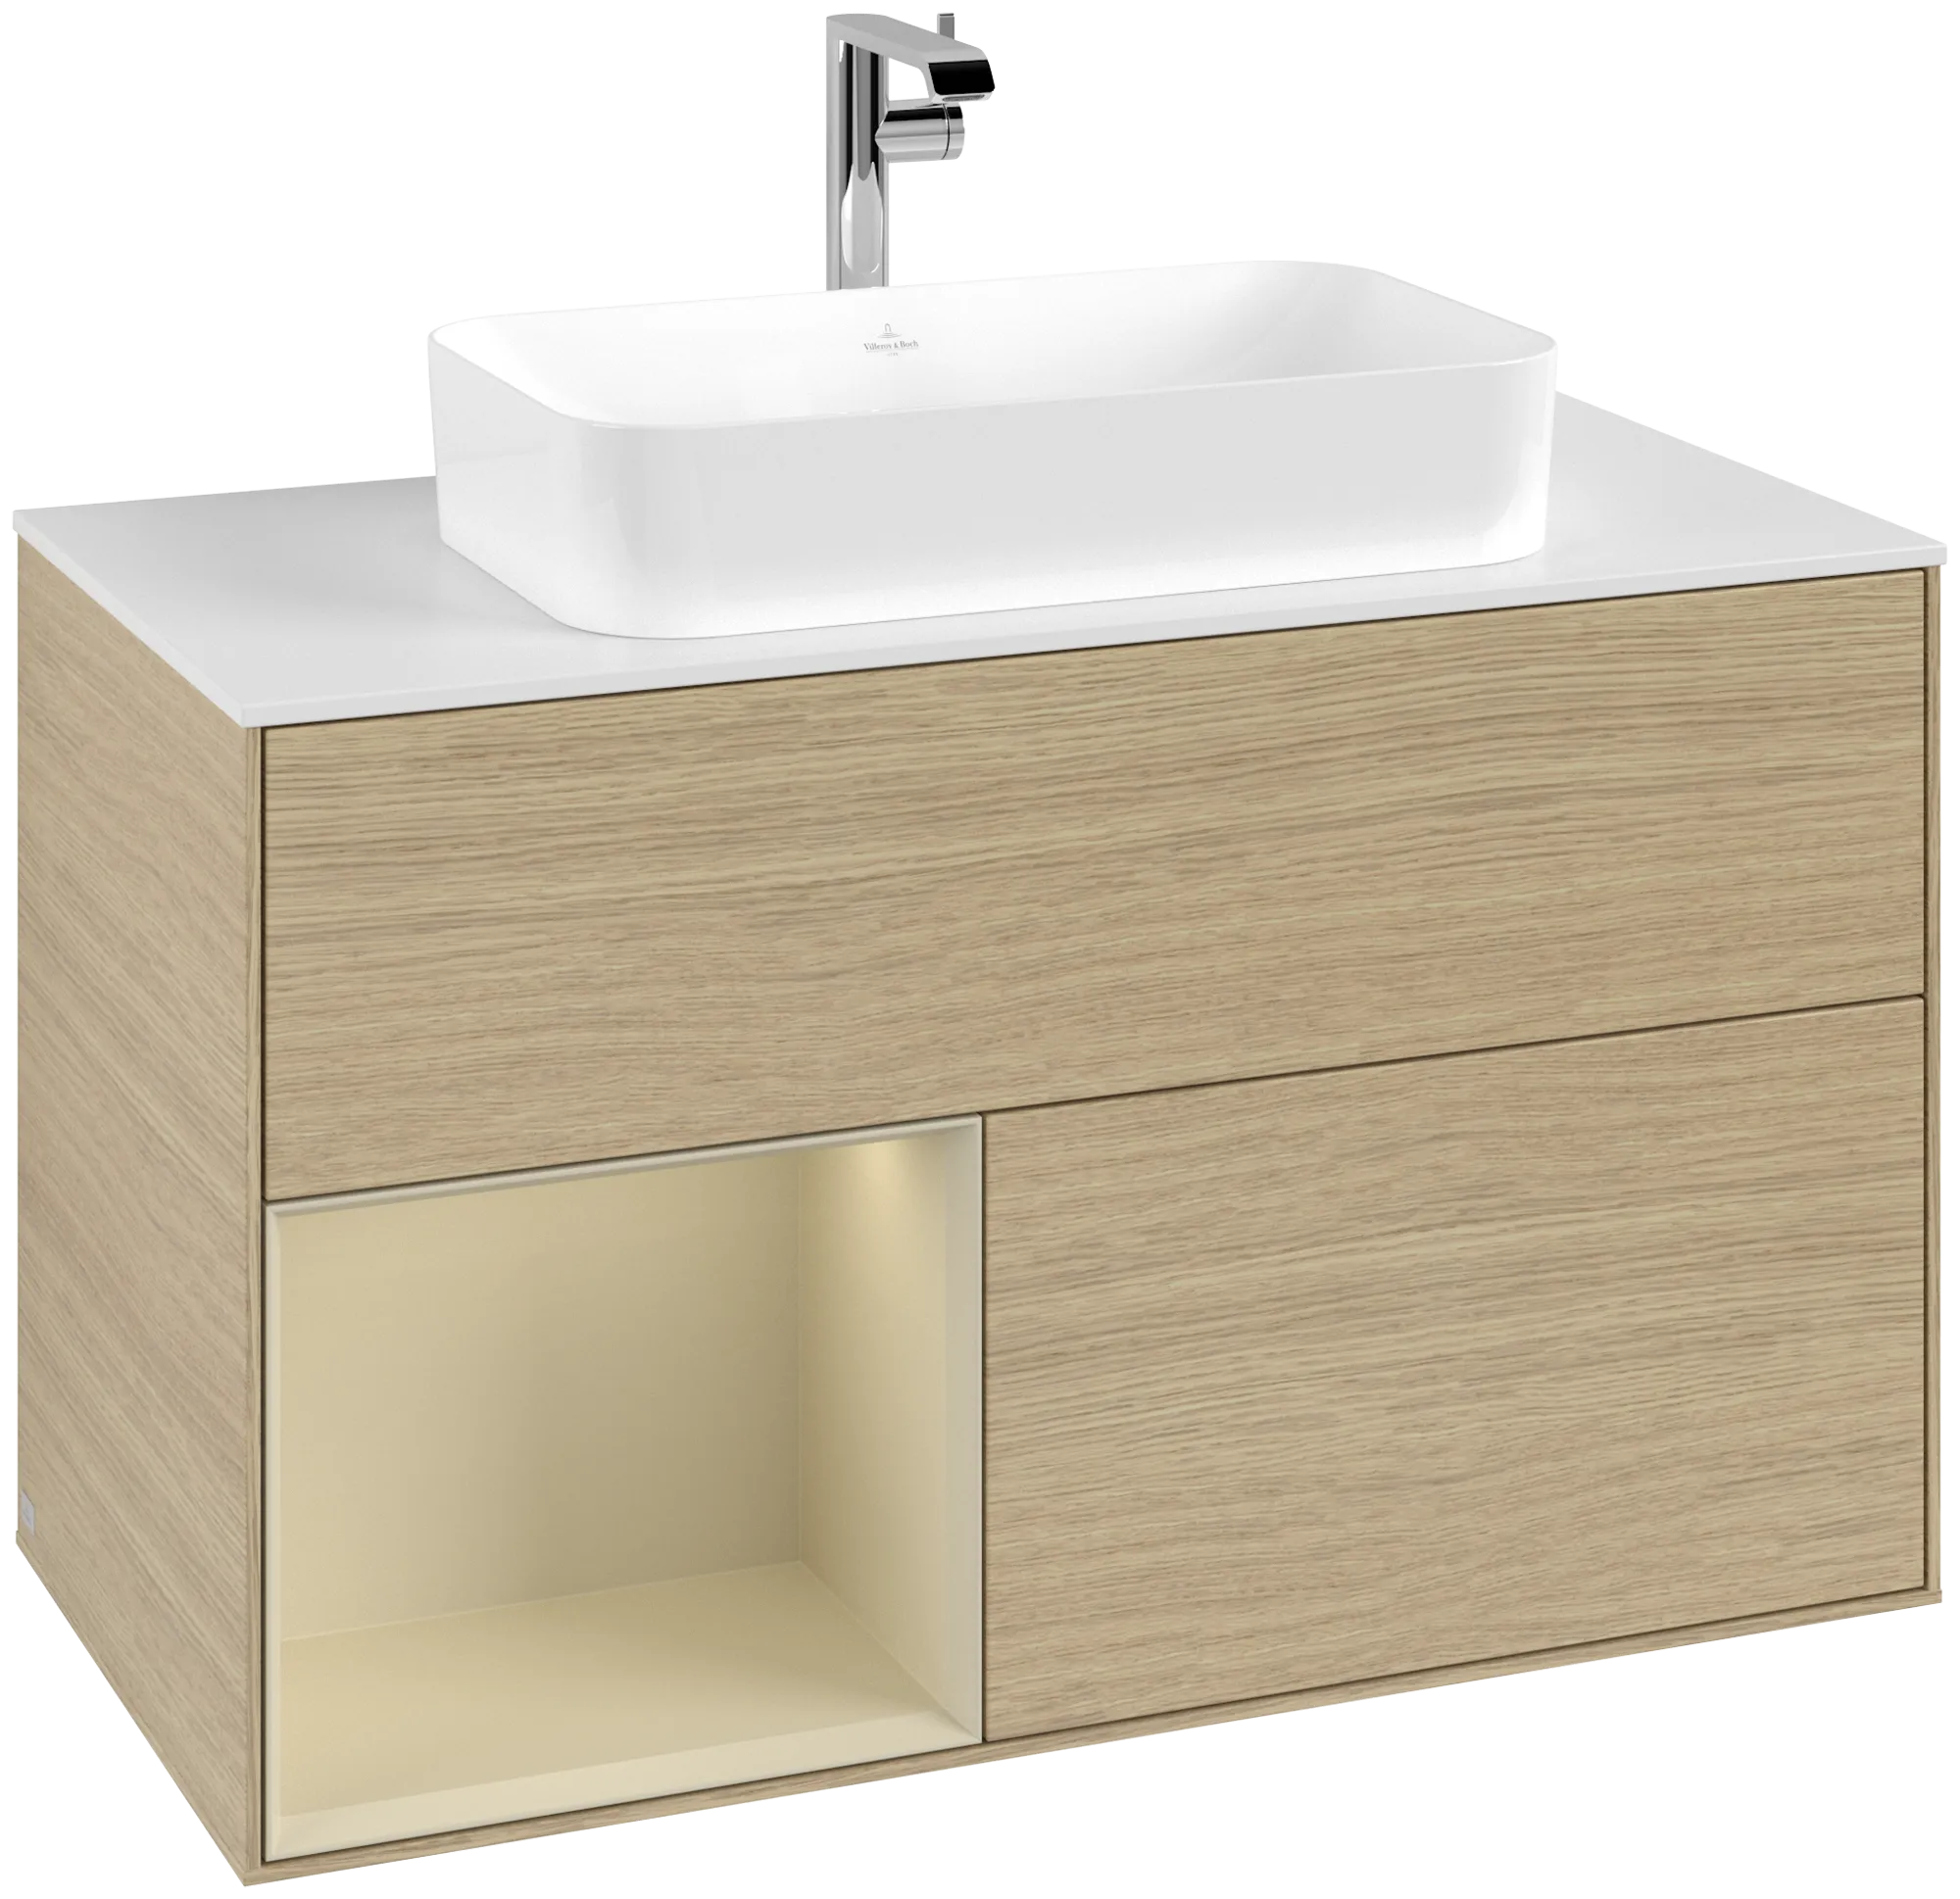 Picture of VILLEROY BOCH Finion Vanity unit, with lighting, 2 pull-out compartments, 1000 x 603 x 501 mm, Oak Veneer / Silk Grey Matt Lacquer / Glass White Matt #G241HJPC